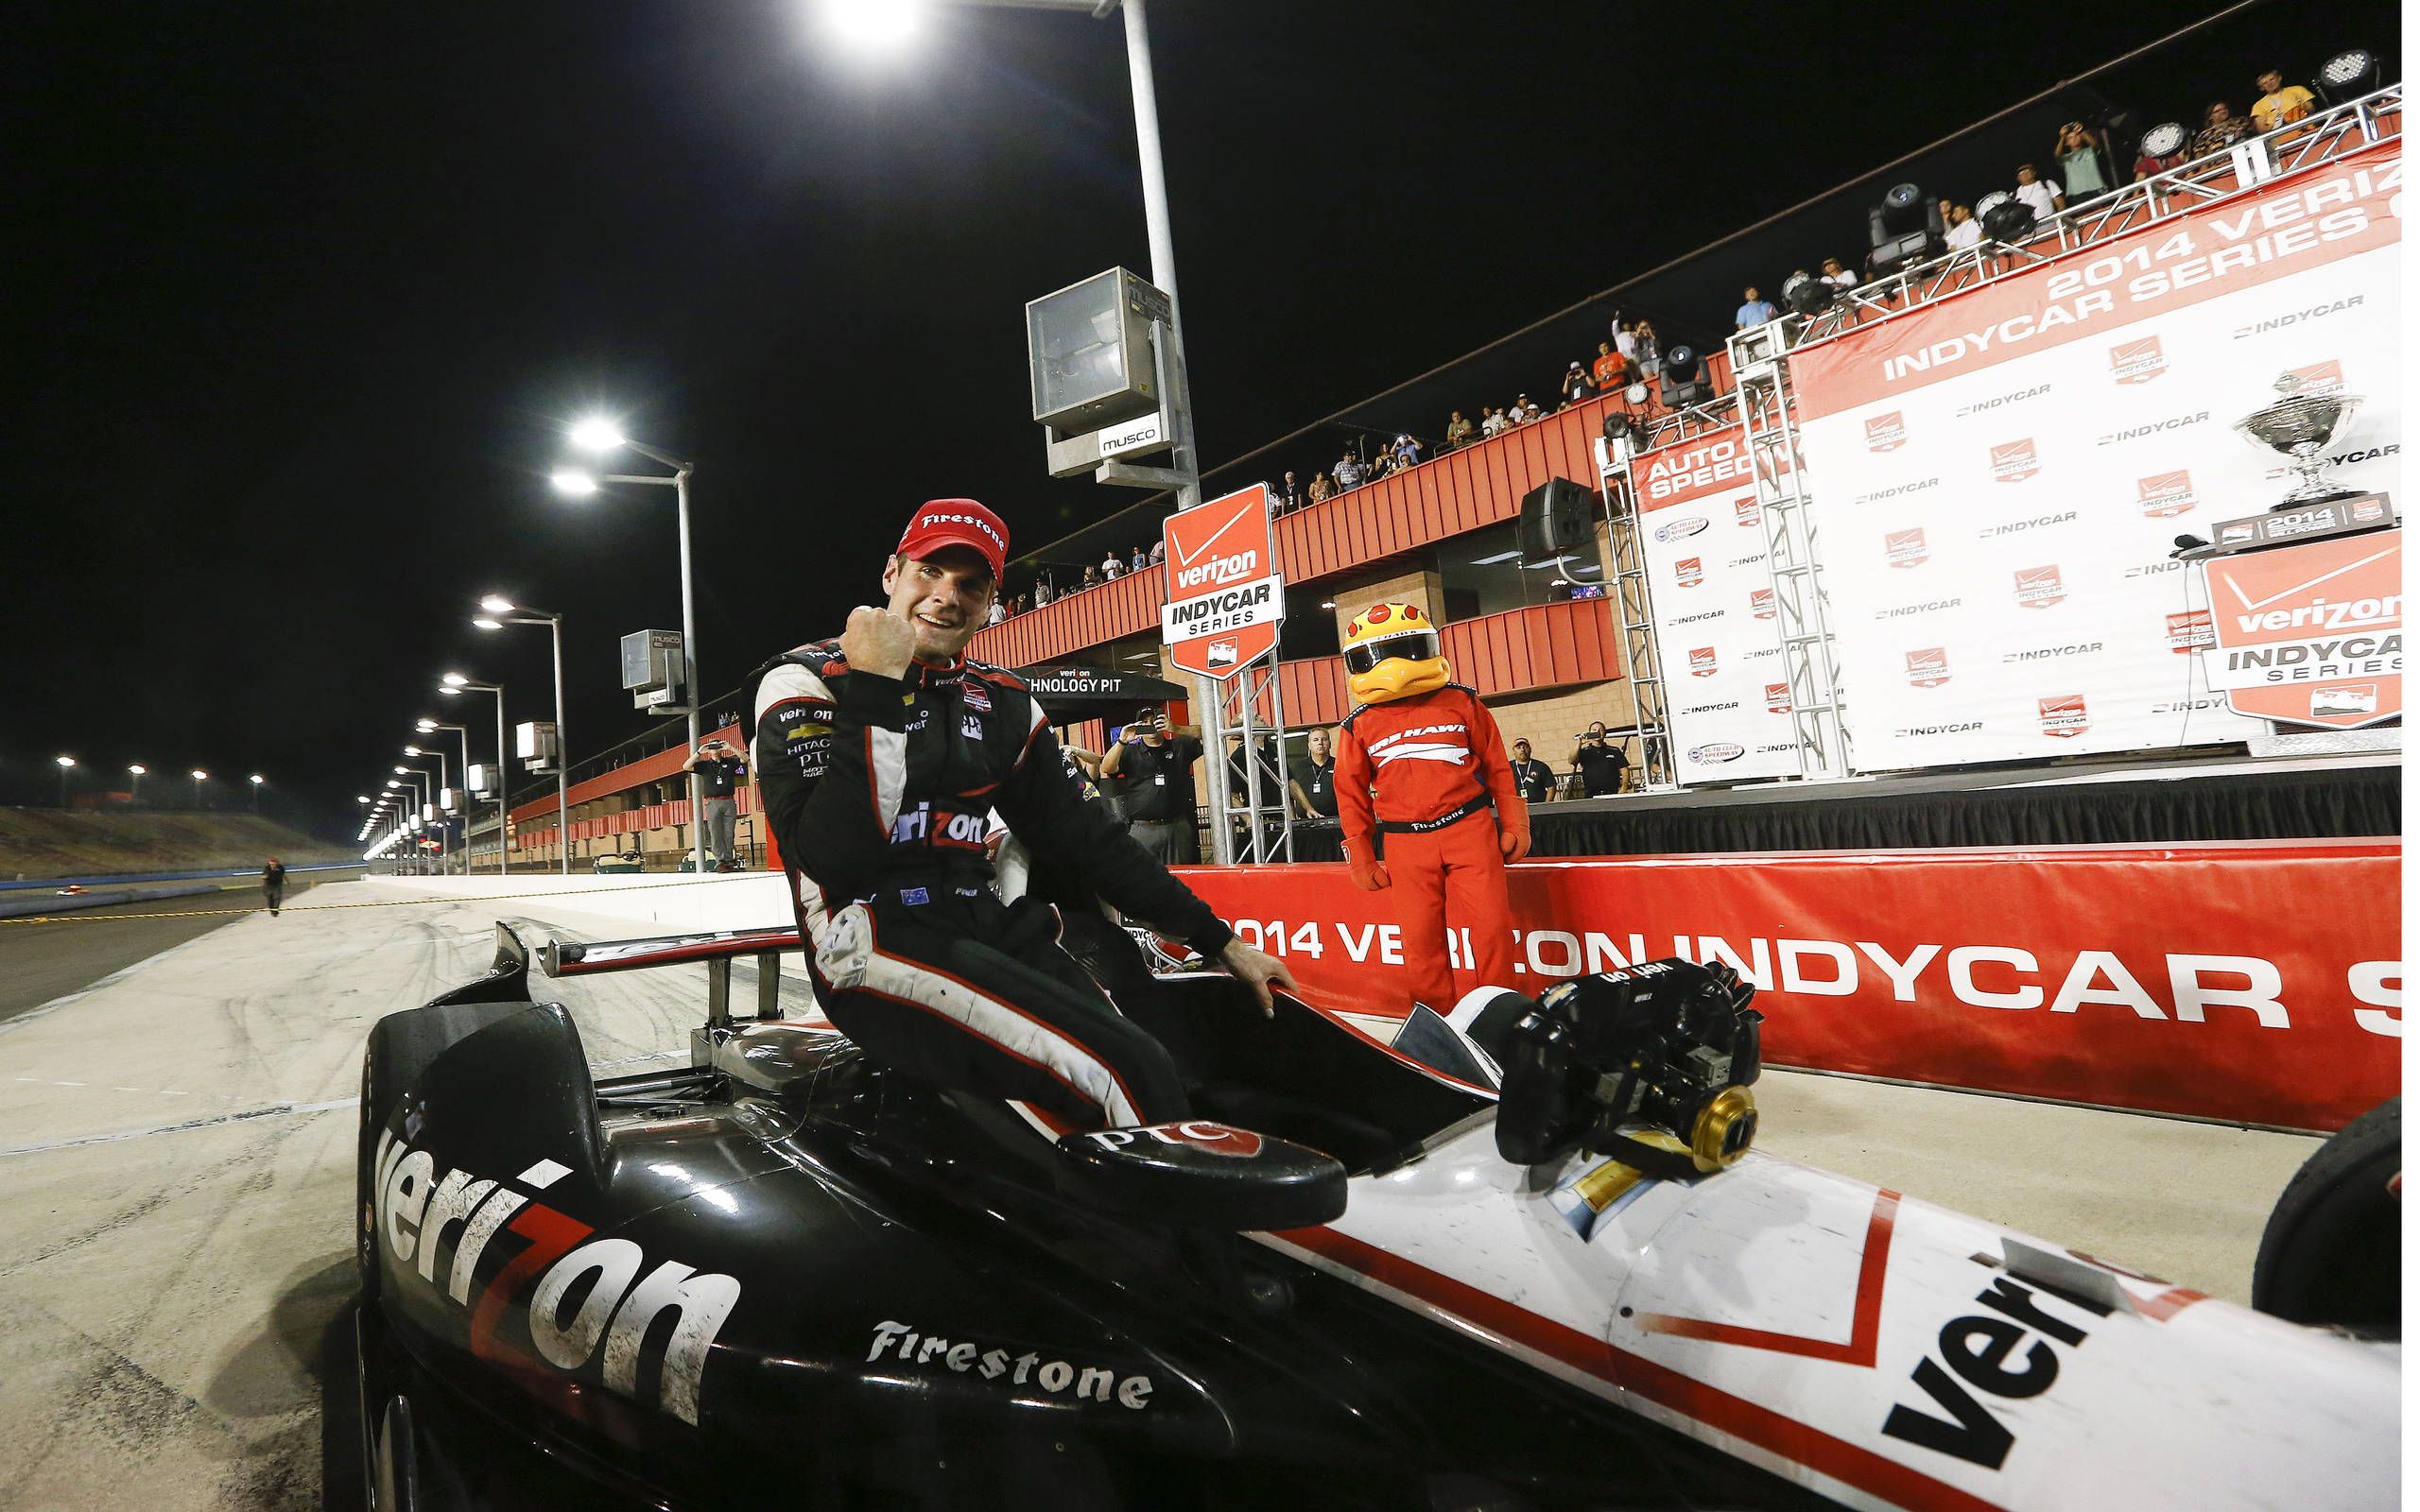 What's next for IndyCar champion Will Power?